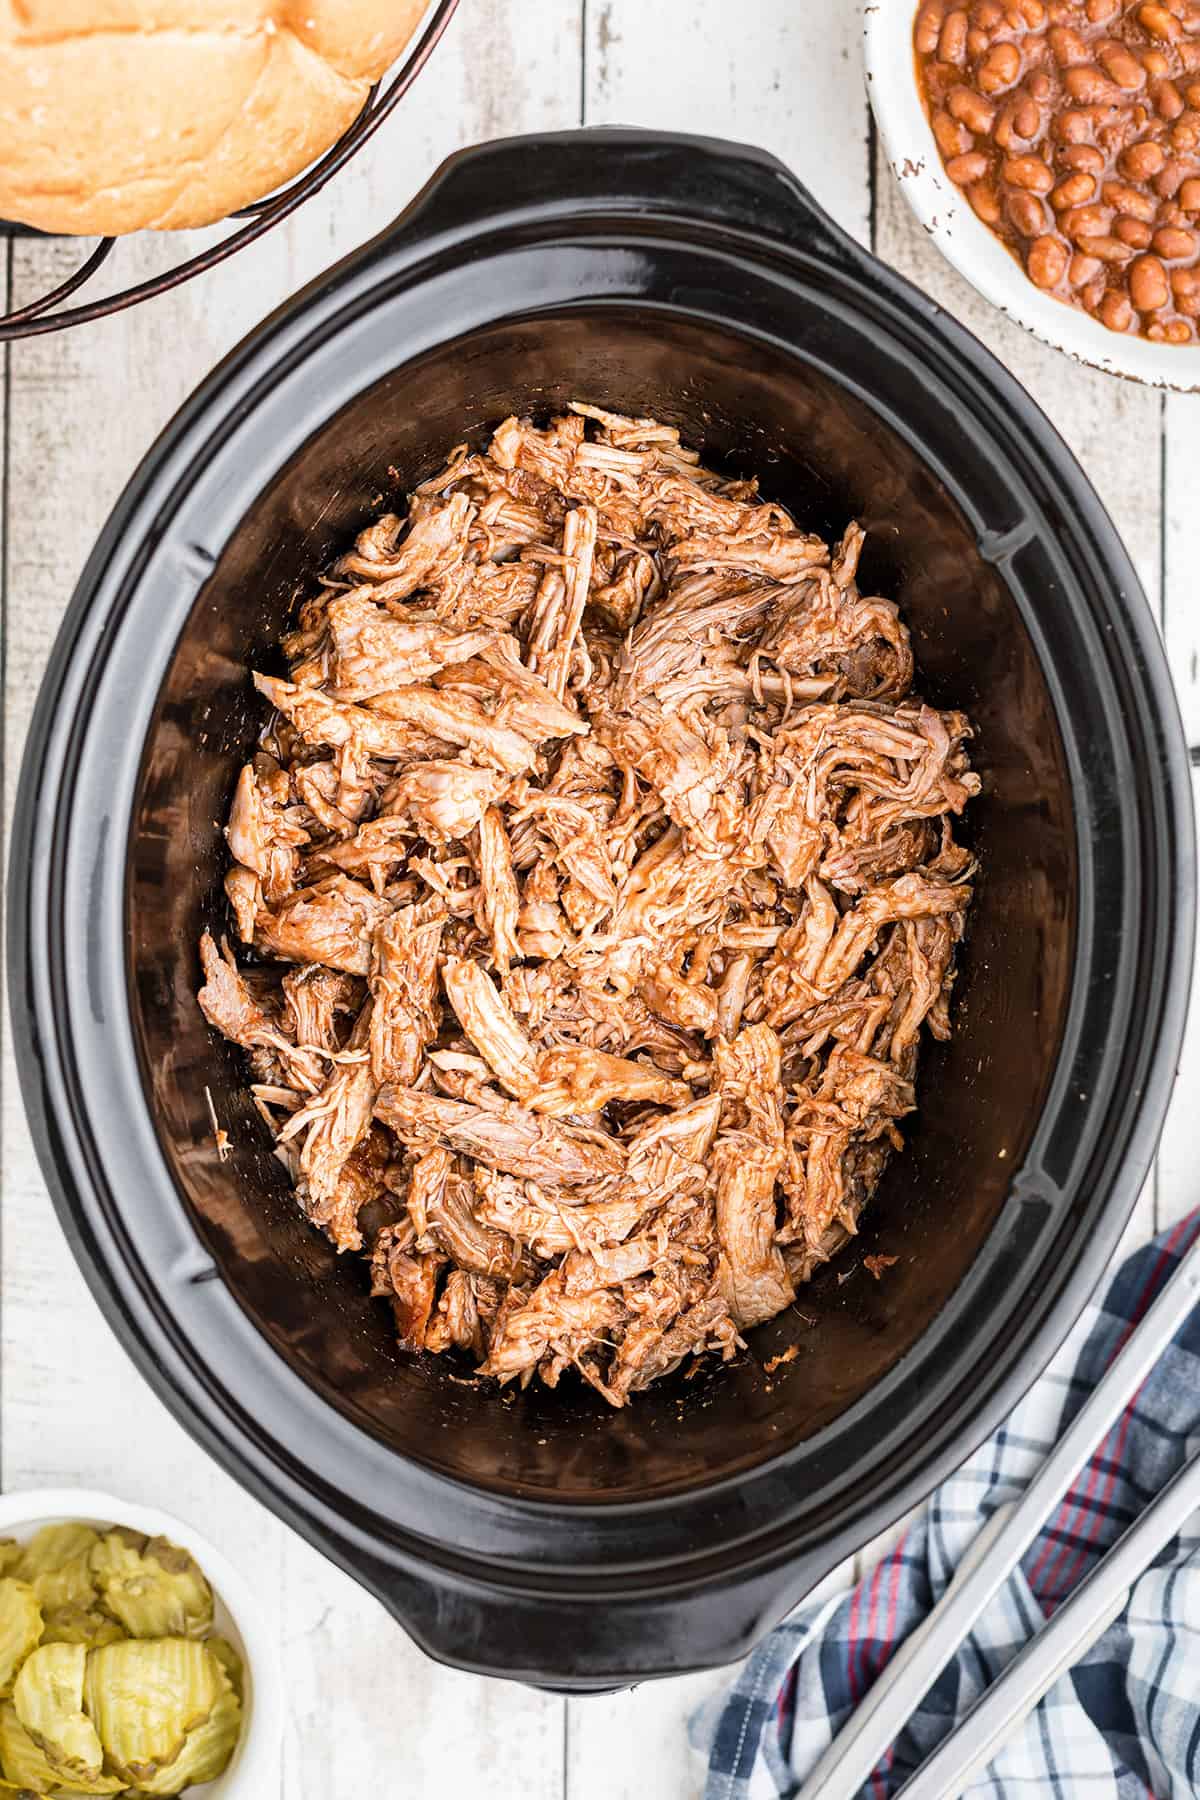 Finished pulled pork in a slow cooker.